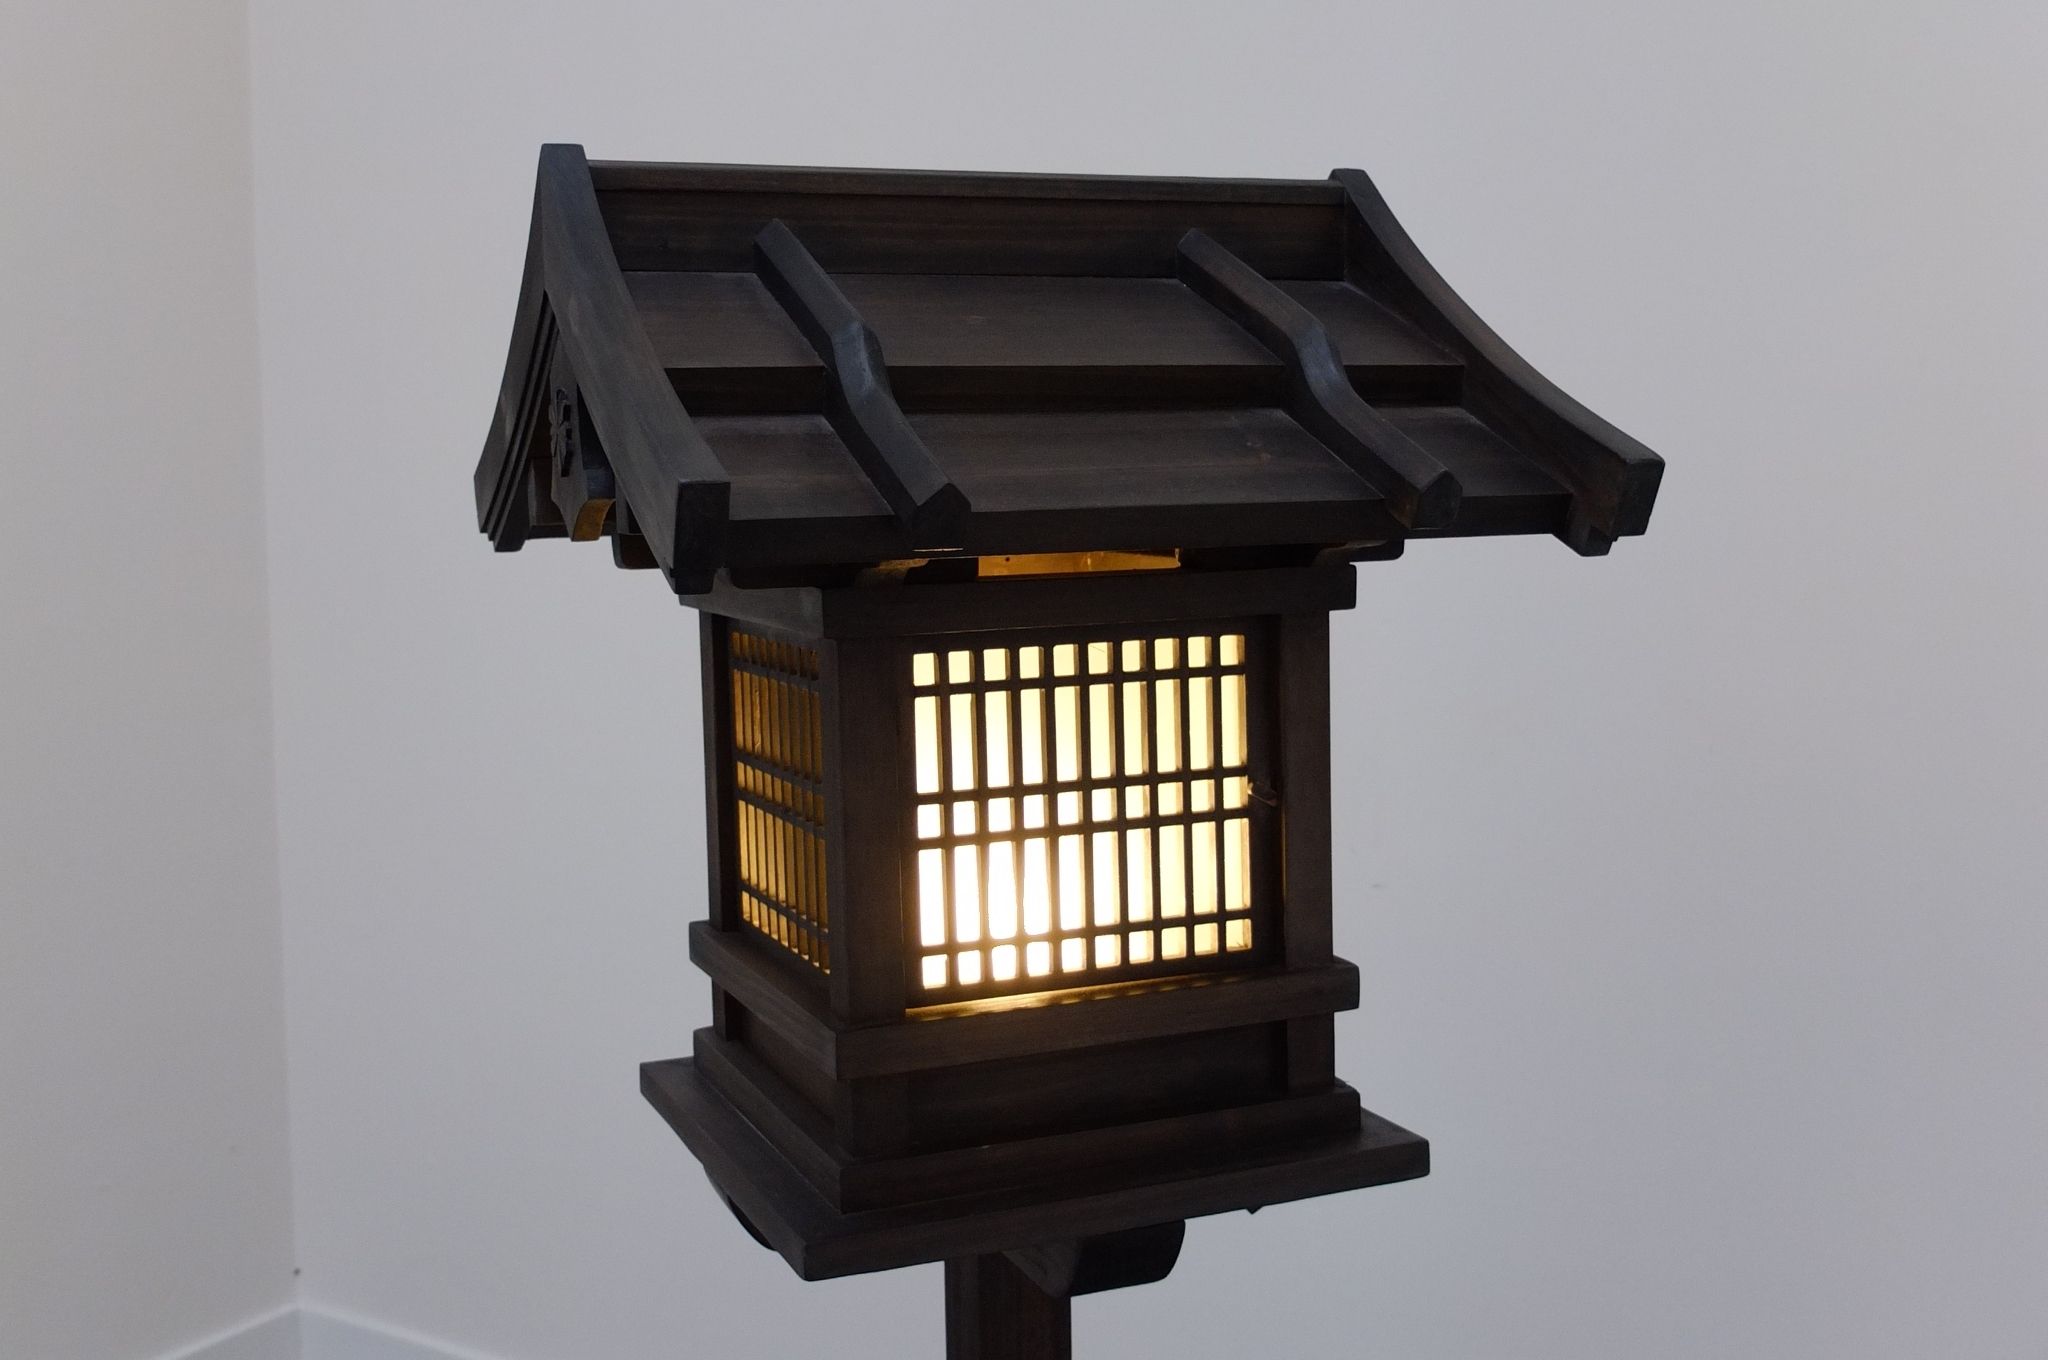 Favorite Japanese Wooden Lantern, Outdoor (wl2) – Eastern Classics With Regard To Outdoor Lighting Japanese Lanterns (View 6 of 20)